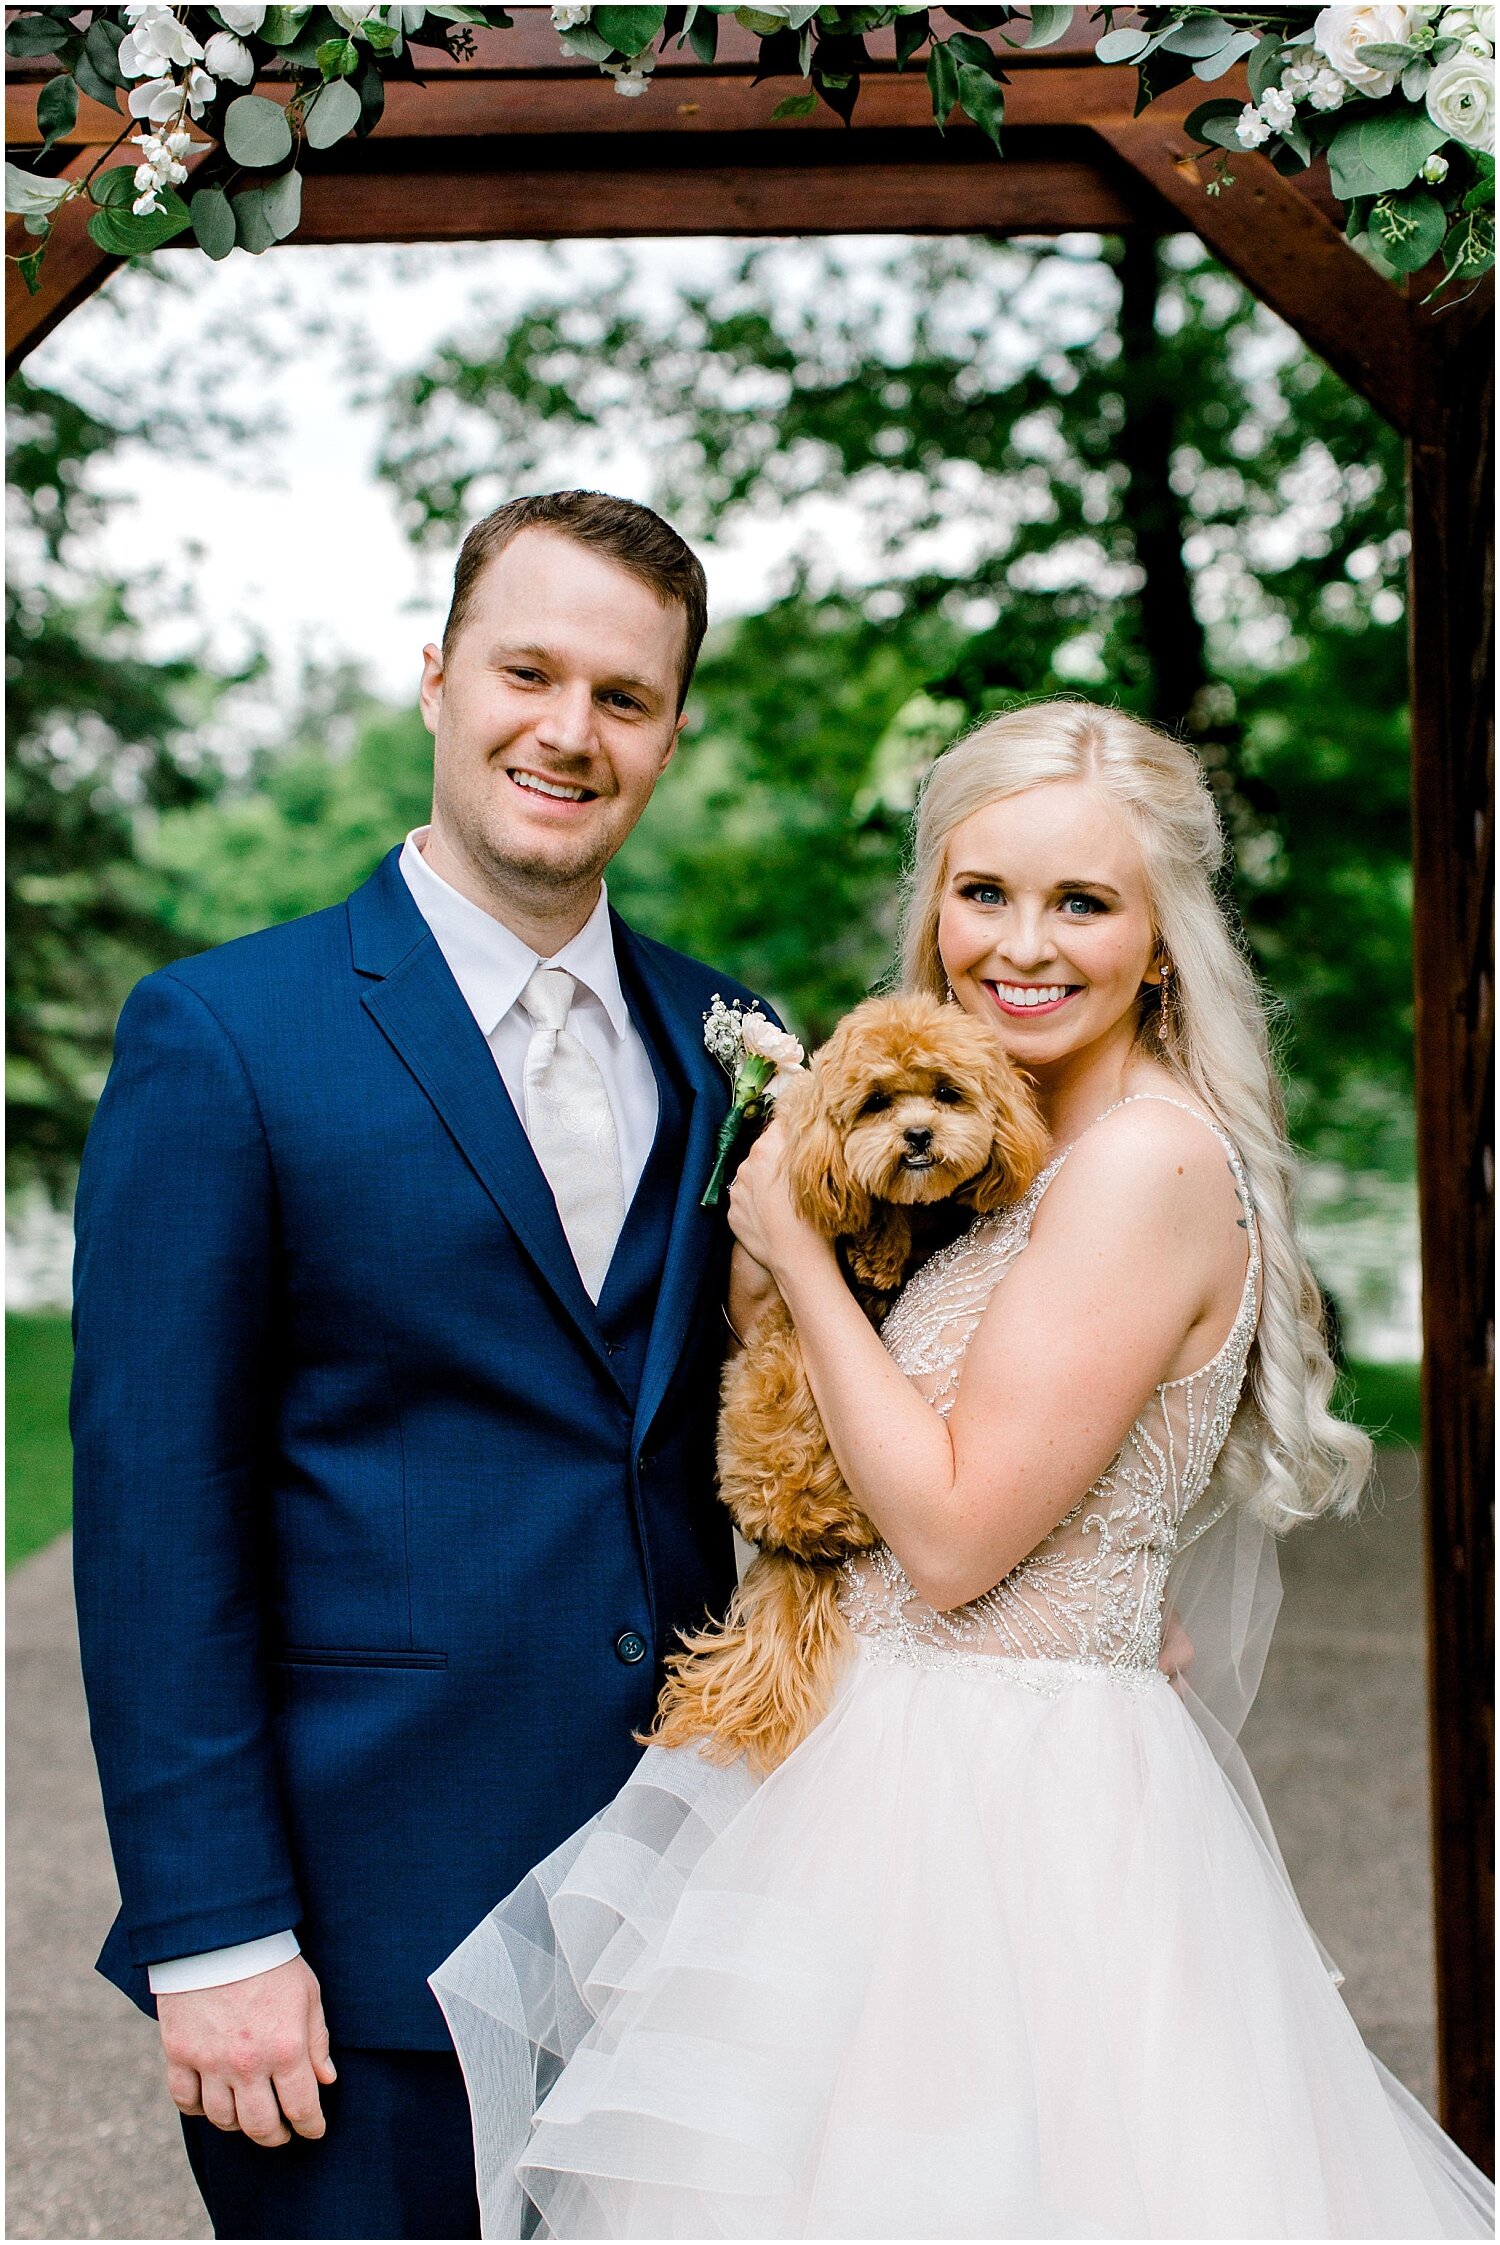  the bride and groom holding their dog before the wedding 